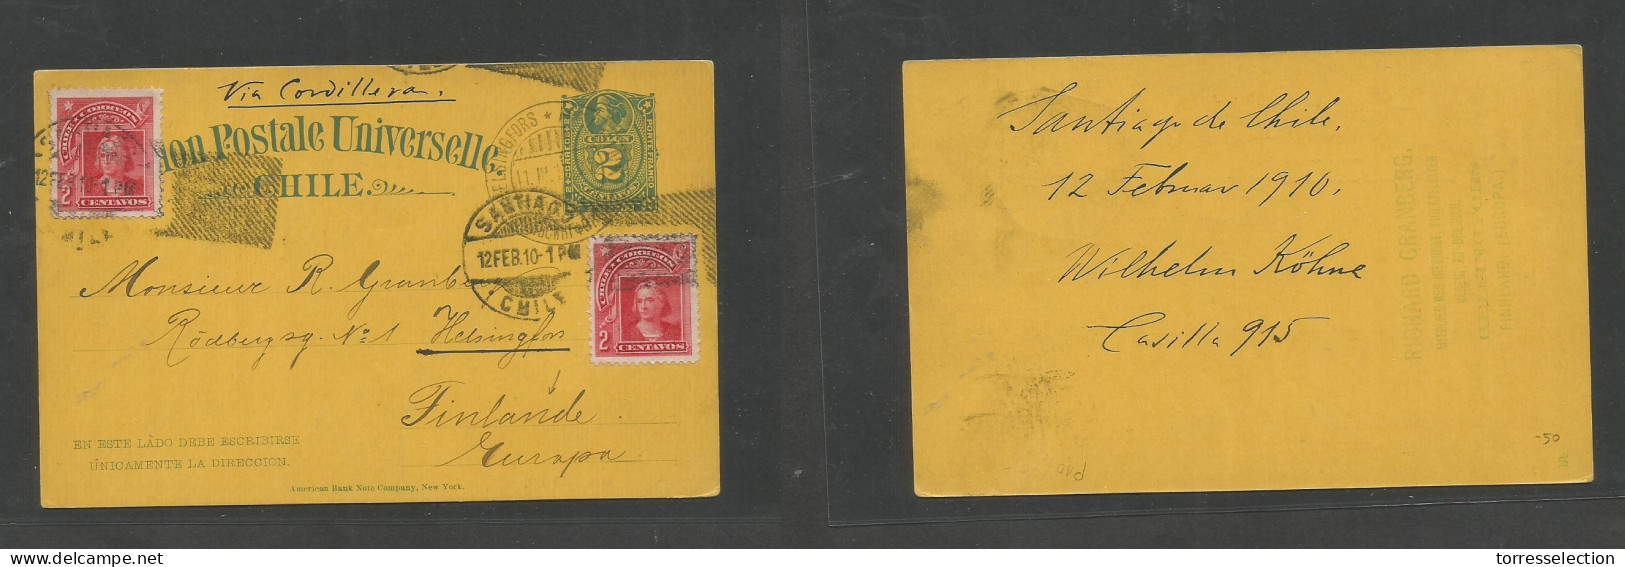 CHILE - Stationery. 1910 (12 Febr) Santiago - Finland, Helsingfors (11 March) 2c Blue / Yellow Stat Card + 2 Adtls, Tied - Cile